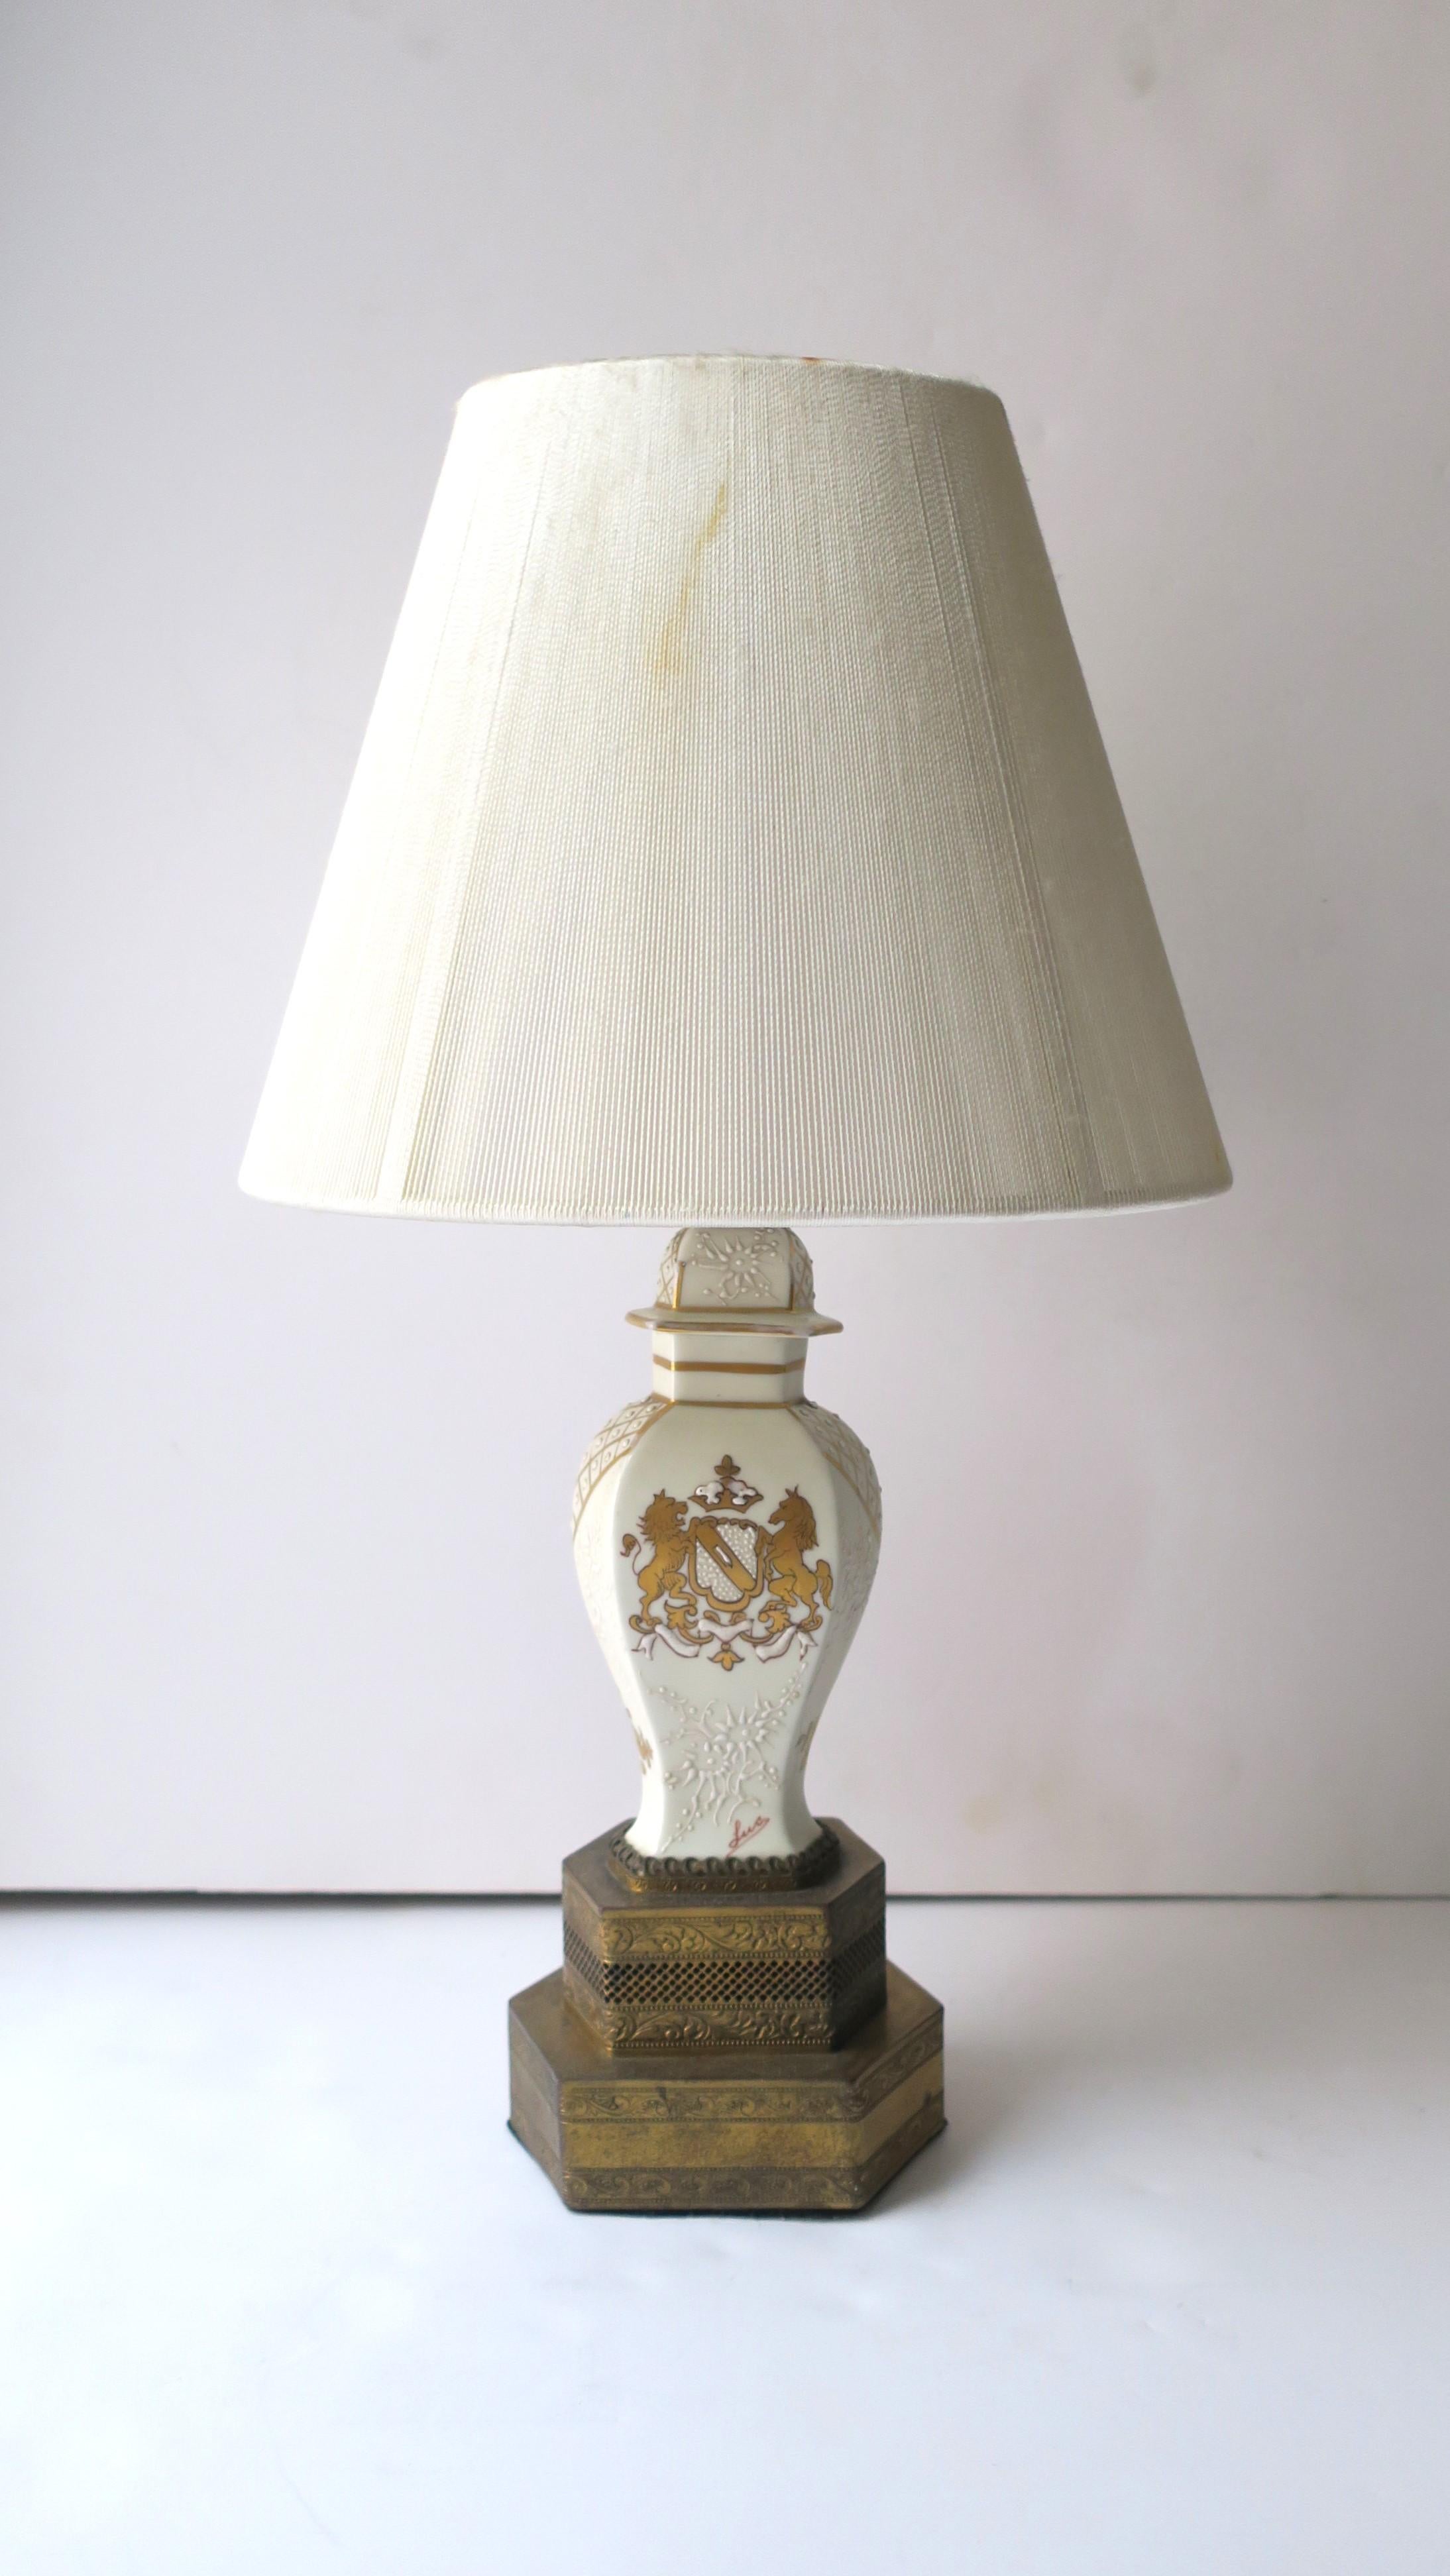 A small French porcelain table lamp with brass base, in the Empire style, circa early-20th century, France. This small French porcelain lamp, with graduated brass 'hexagon' base, has a white raised relief on front, sides, and back. Front center